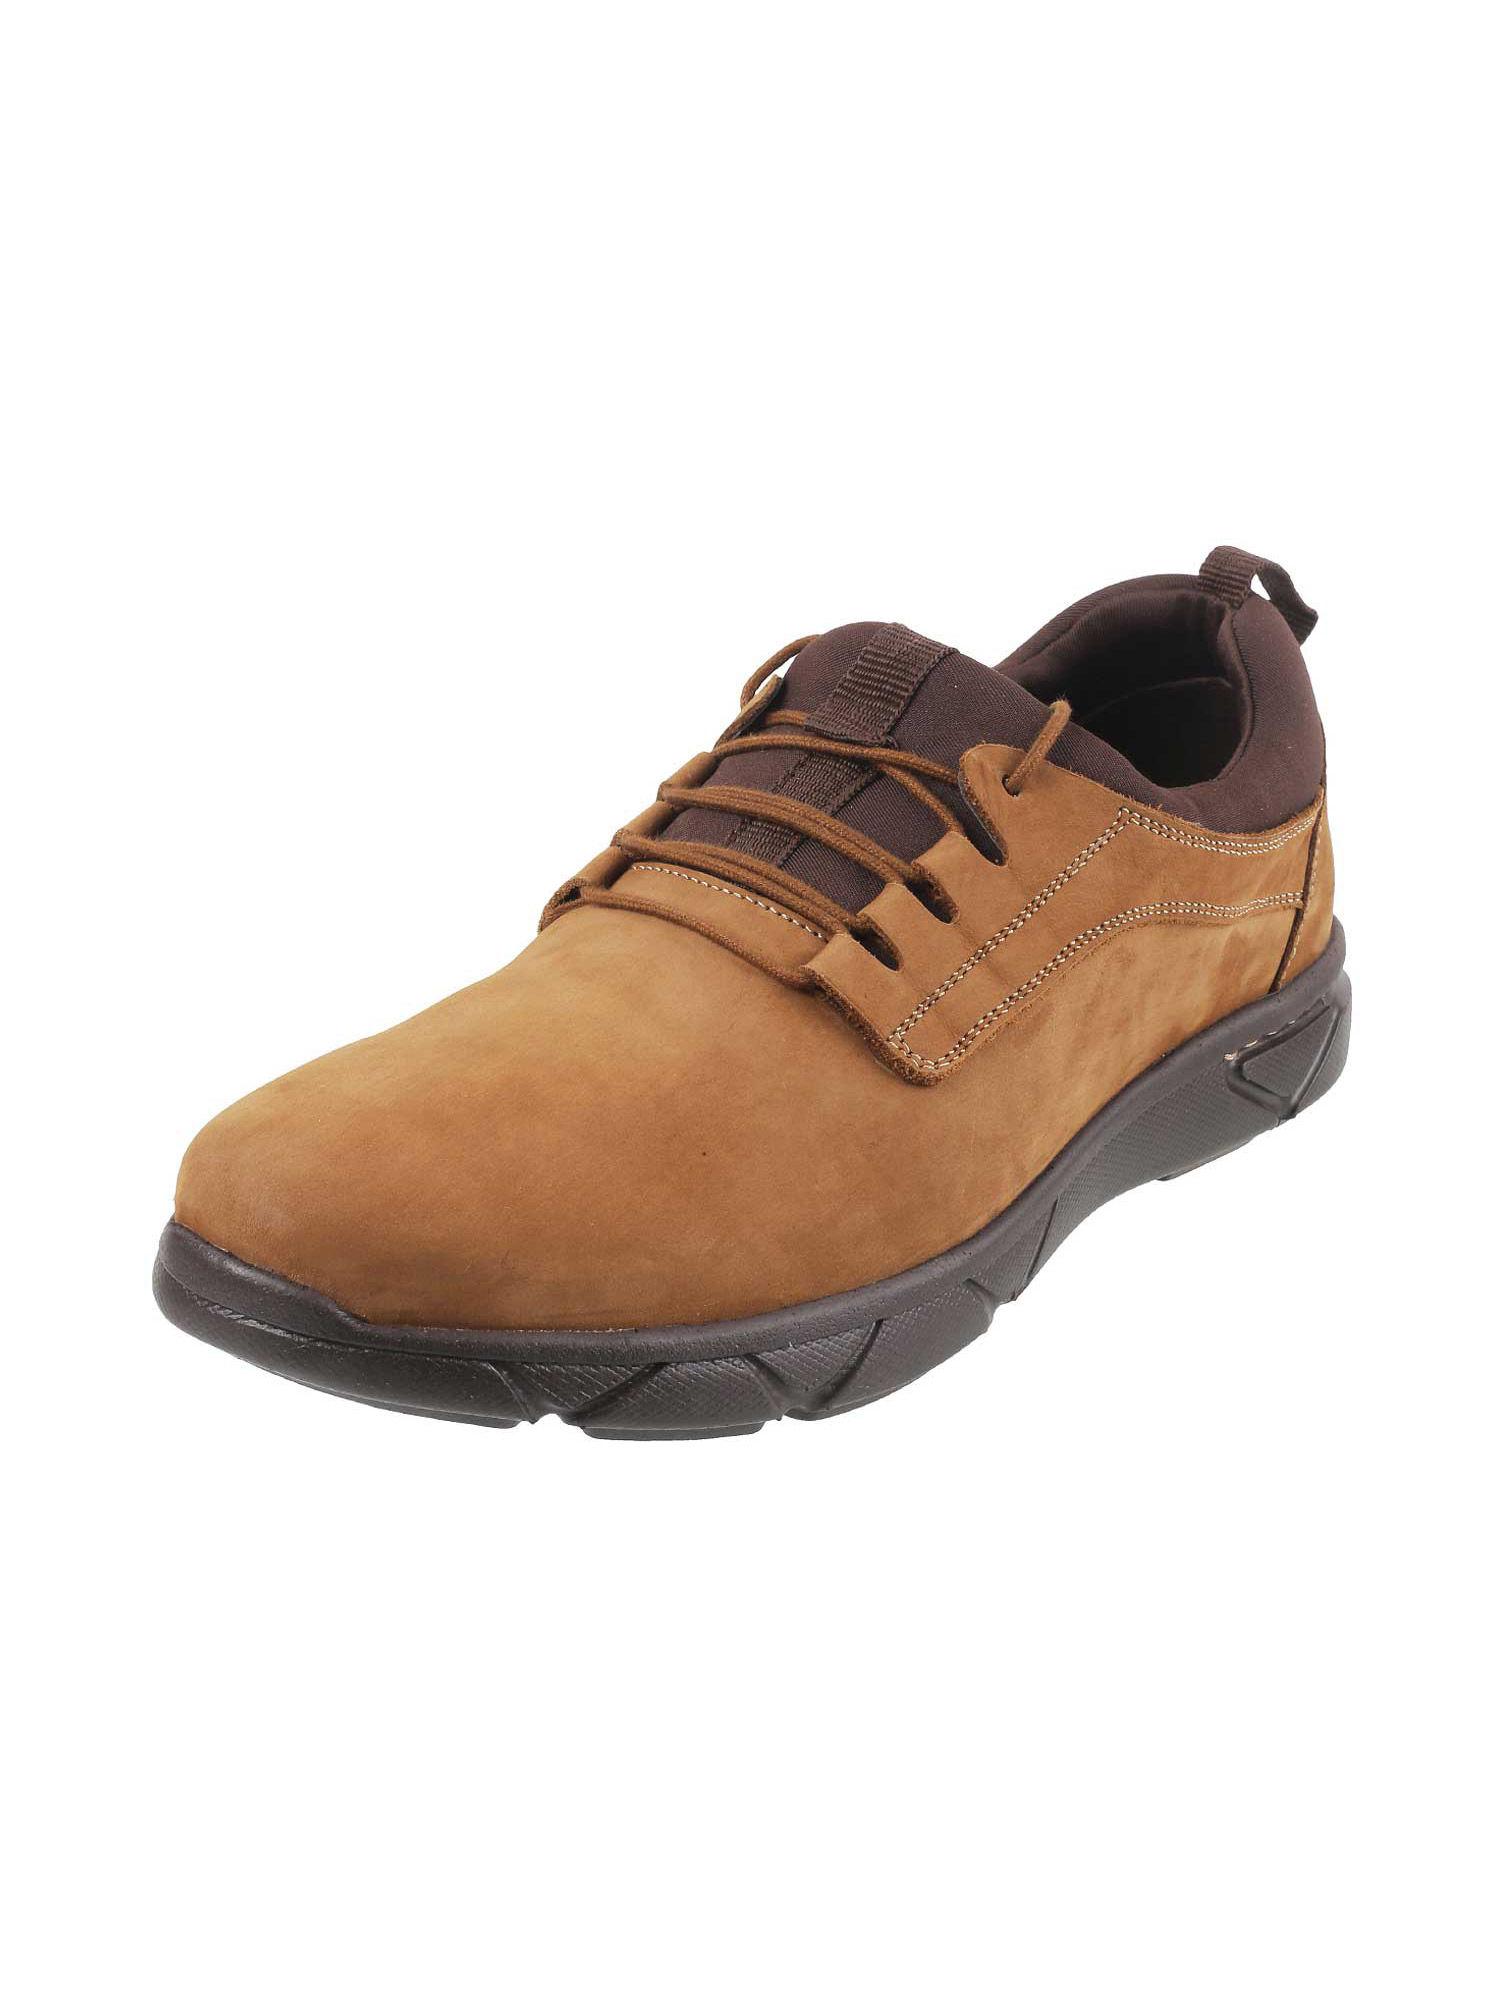 mens camel lace-ups shoesmochi brown solid lace-up shoes